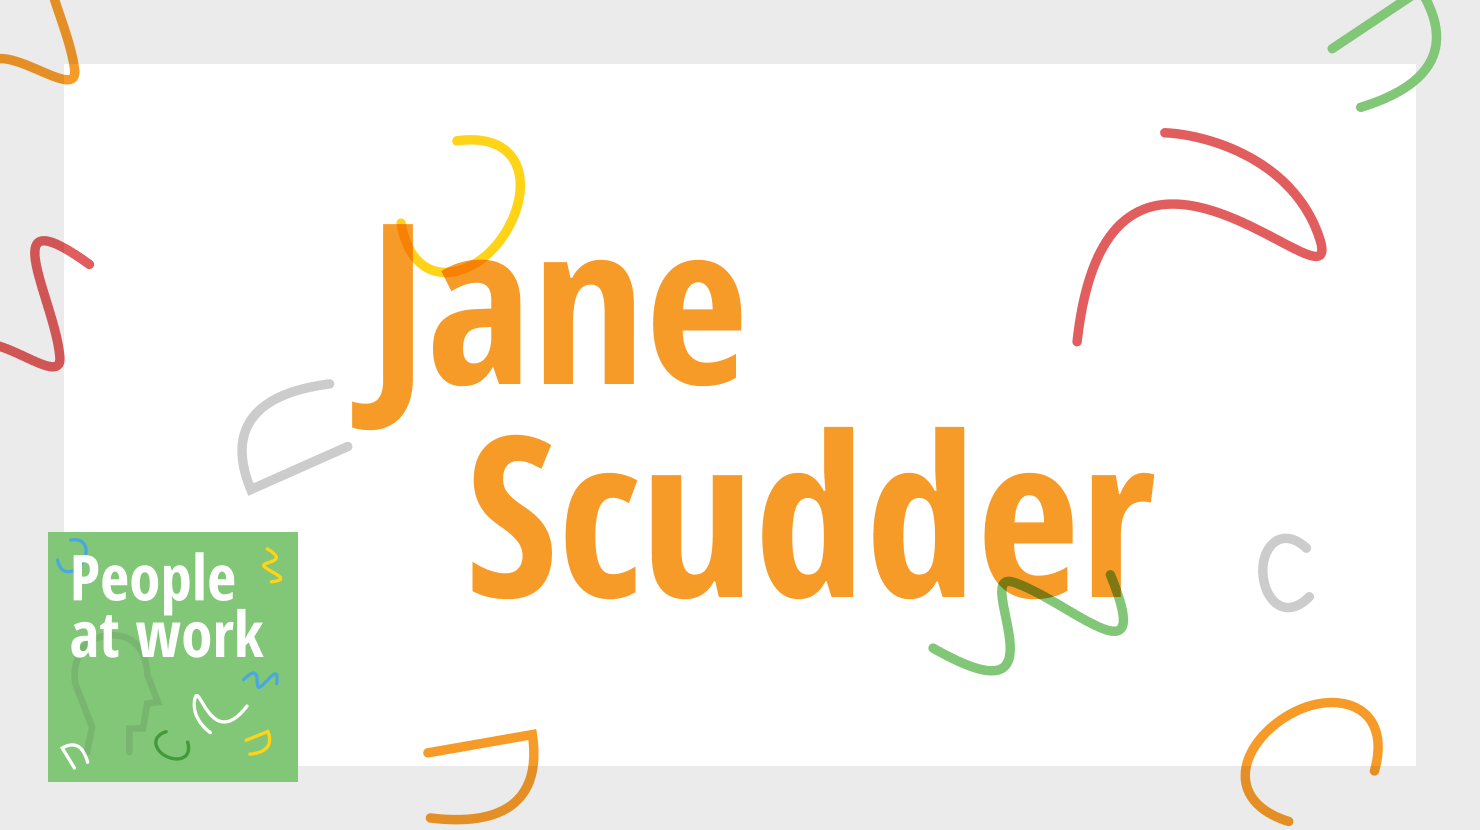 Observe before acting suggests Jane Scudder